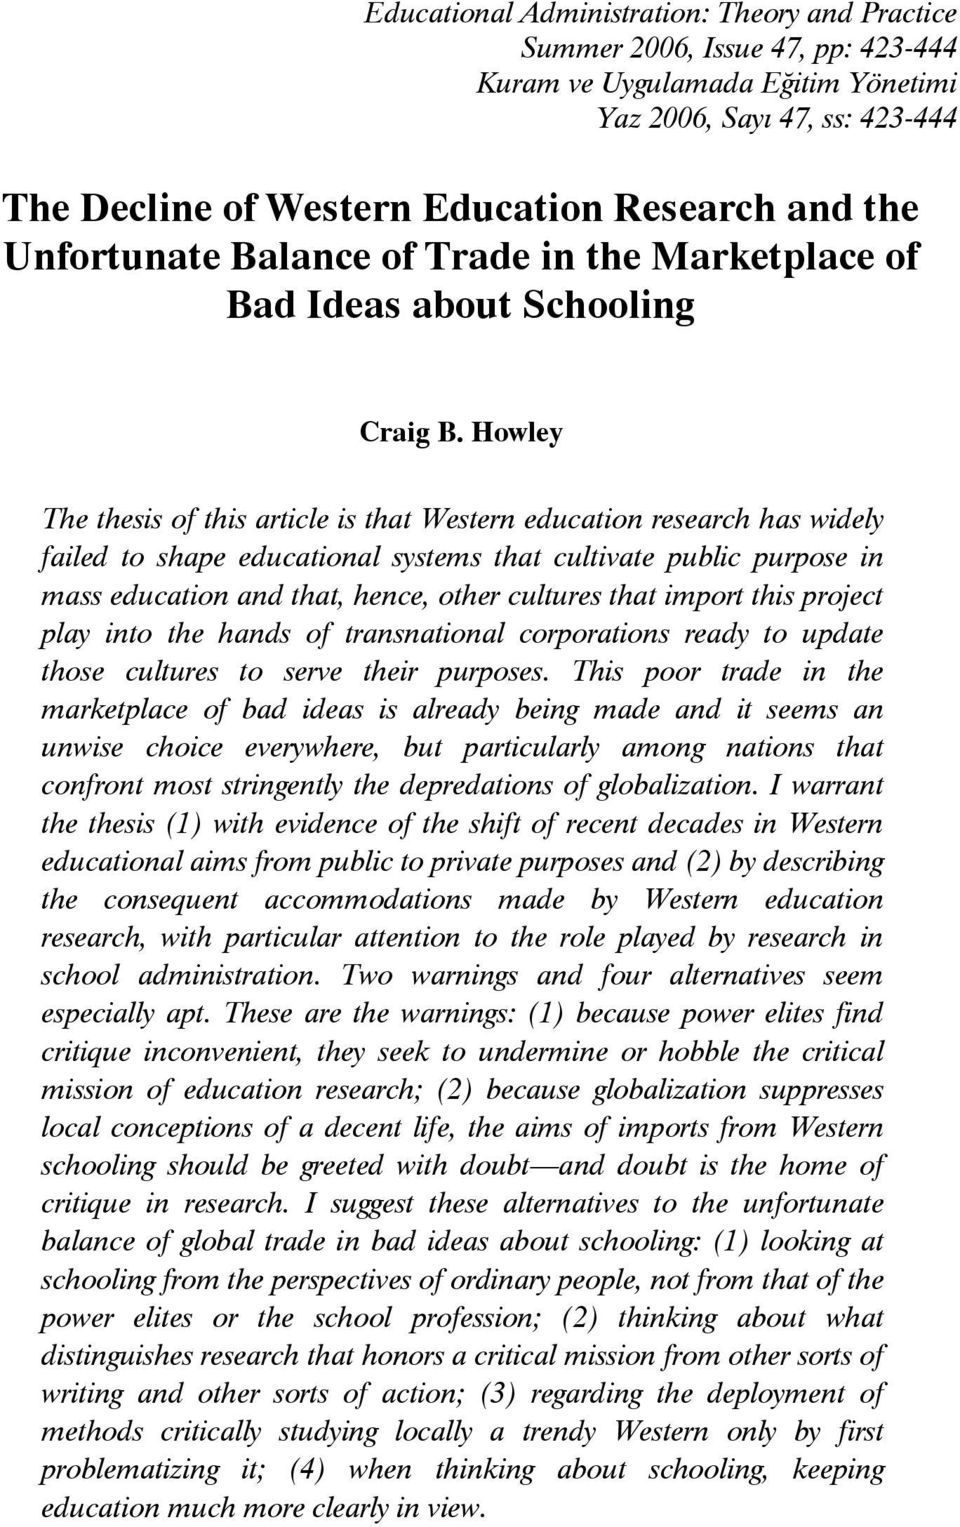 Howley The thesis of this article is that Western education research has widely failed to shape educational systems that cultivate public purpose in mass education and that, hence, other cultures